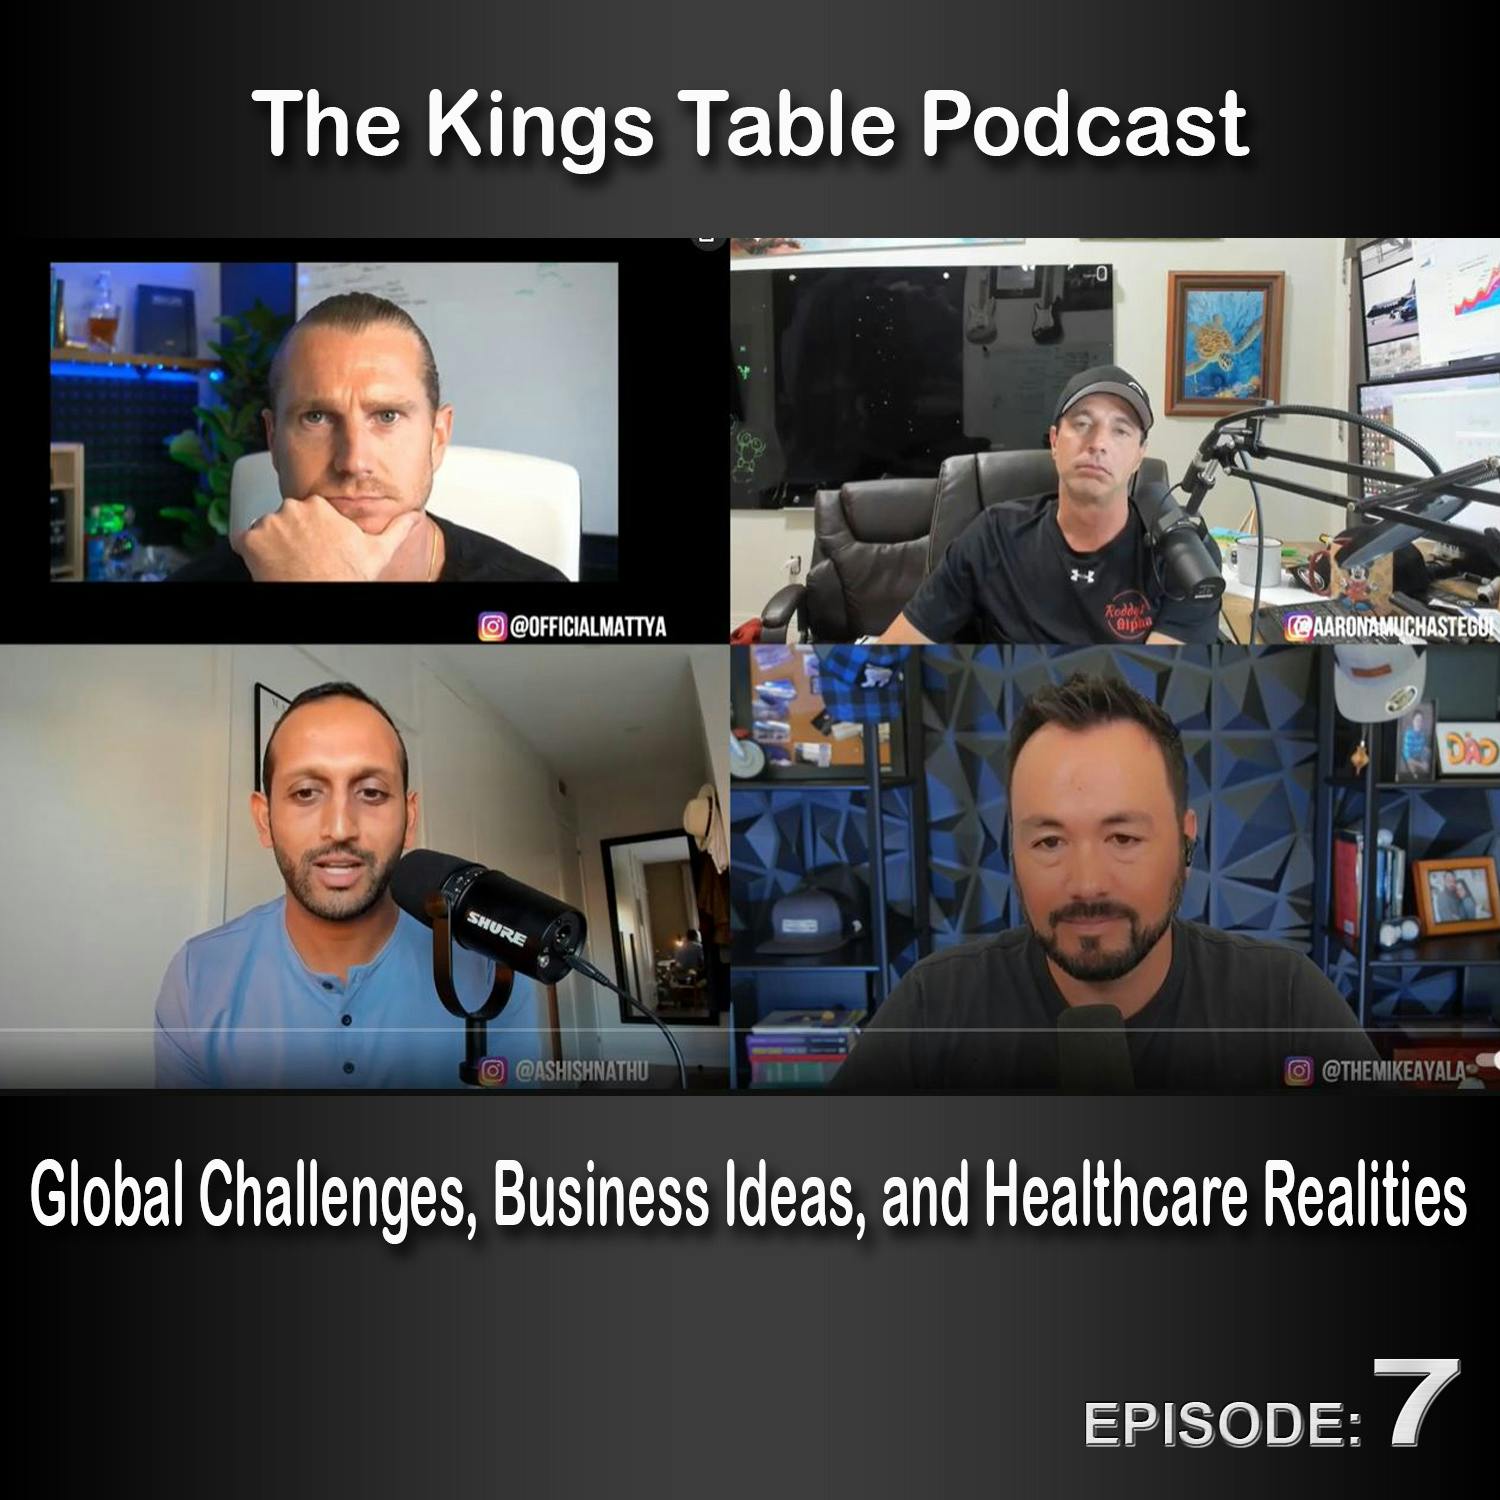 The Kings Table Episode 7 - Global Challenges, Business Ideas, and Healthcare Realities